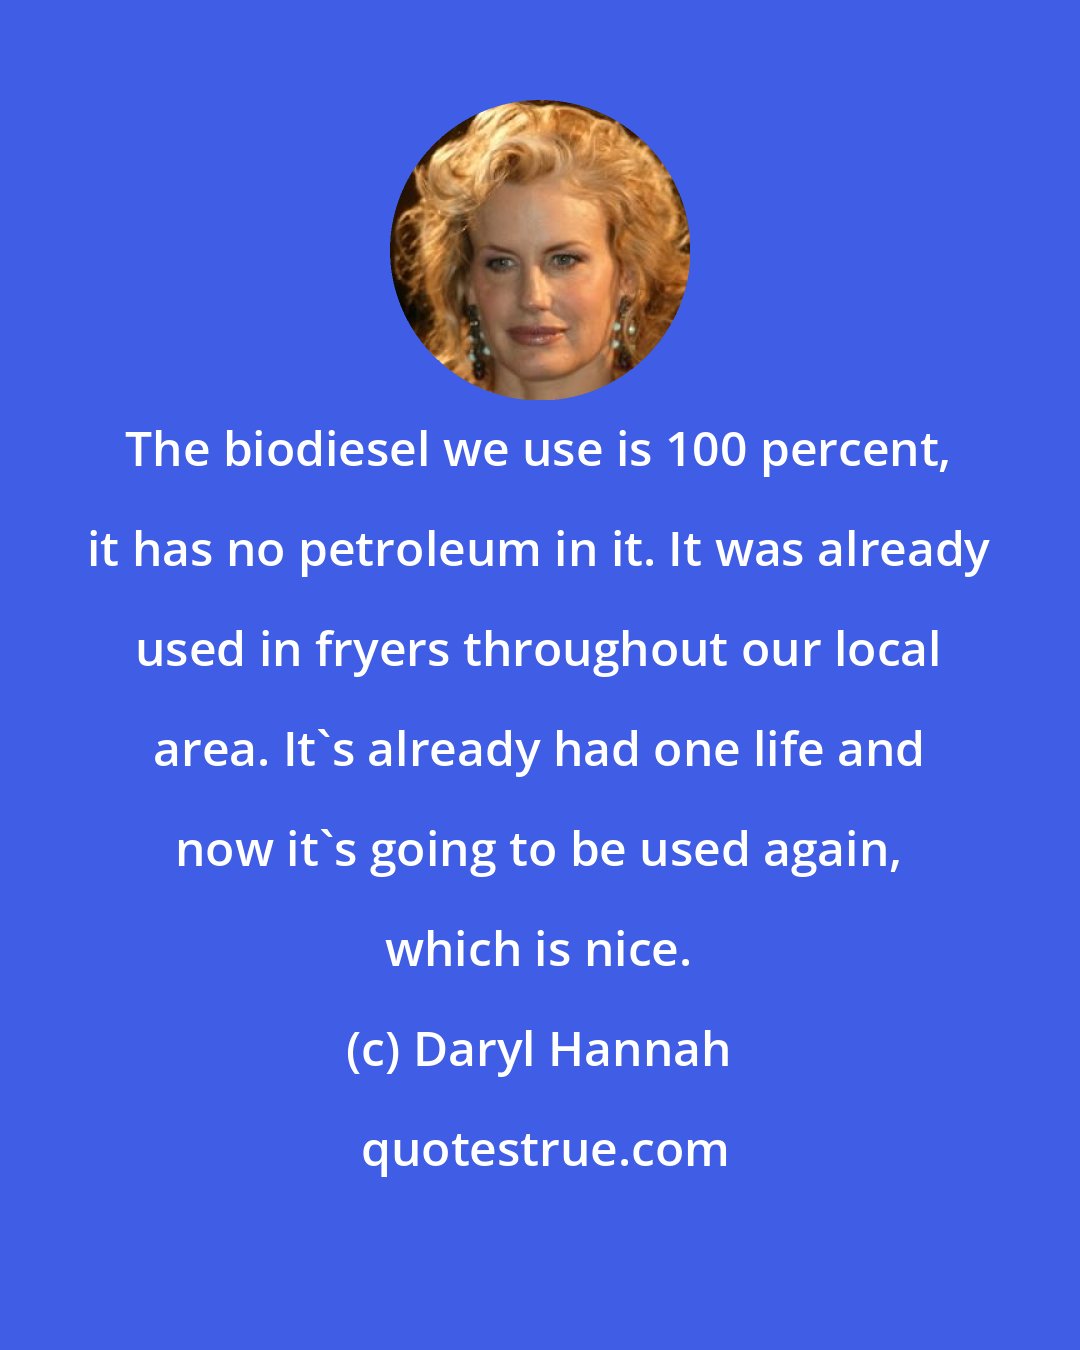 Daryl Hannah: The biodiesel we use is 100 percent, it has no petroleum in it. It was already used in fryers throughout our local area. It's already had one life and now it's going to be used again, which is nice.